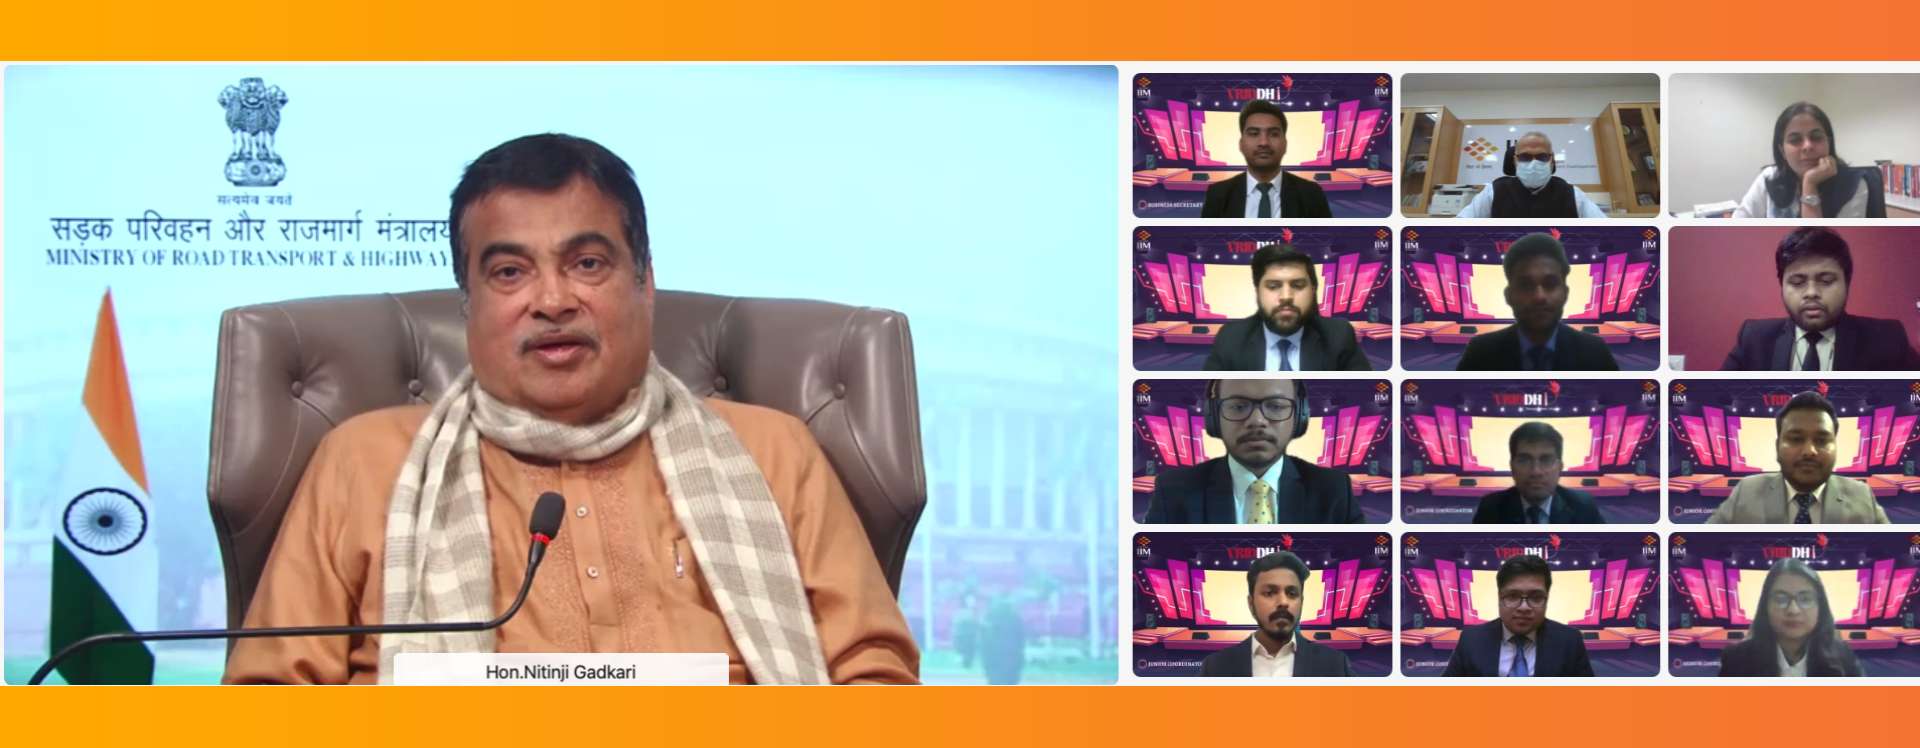 Hon'ble Union Minister of Road Transport & Highways, Shri Nitin Gadkari ji, delivering Keynote Address on 30/1/2022 in the Annual Business Conclave 